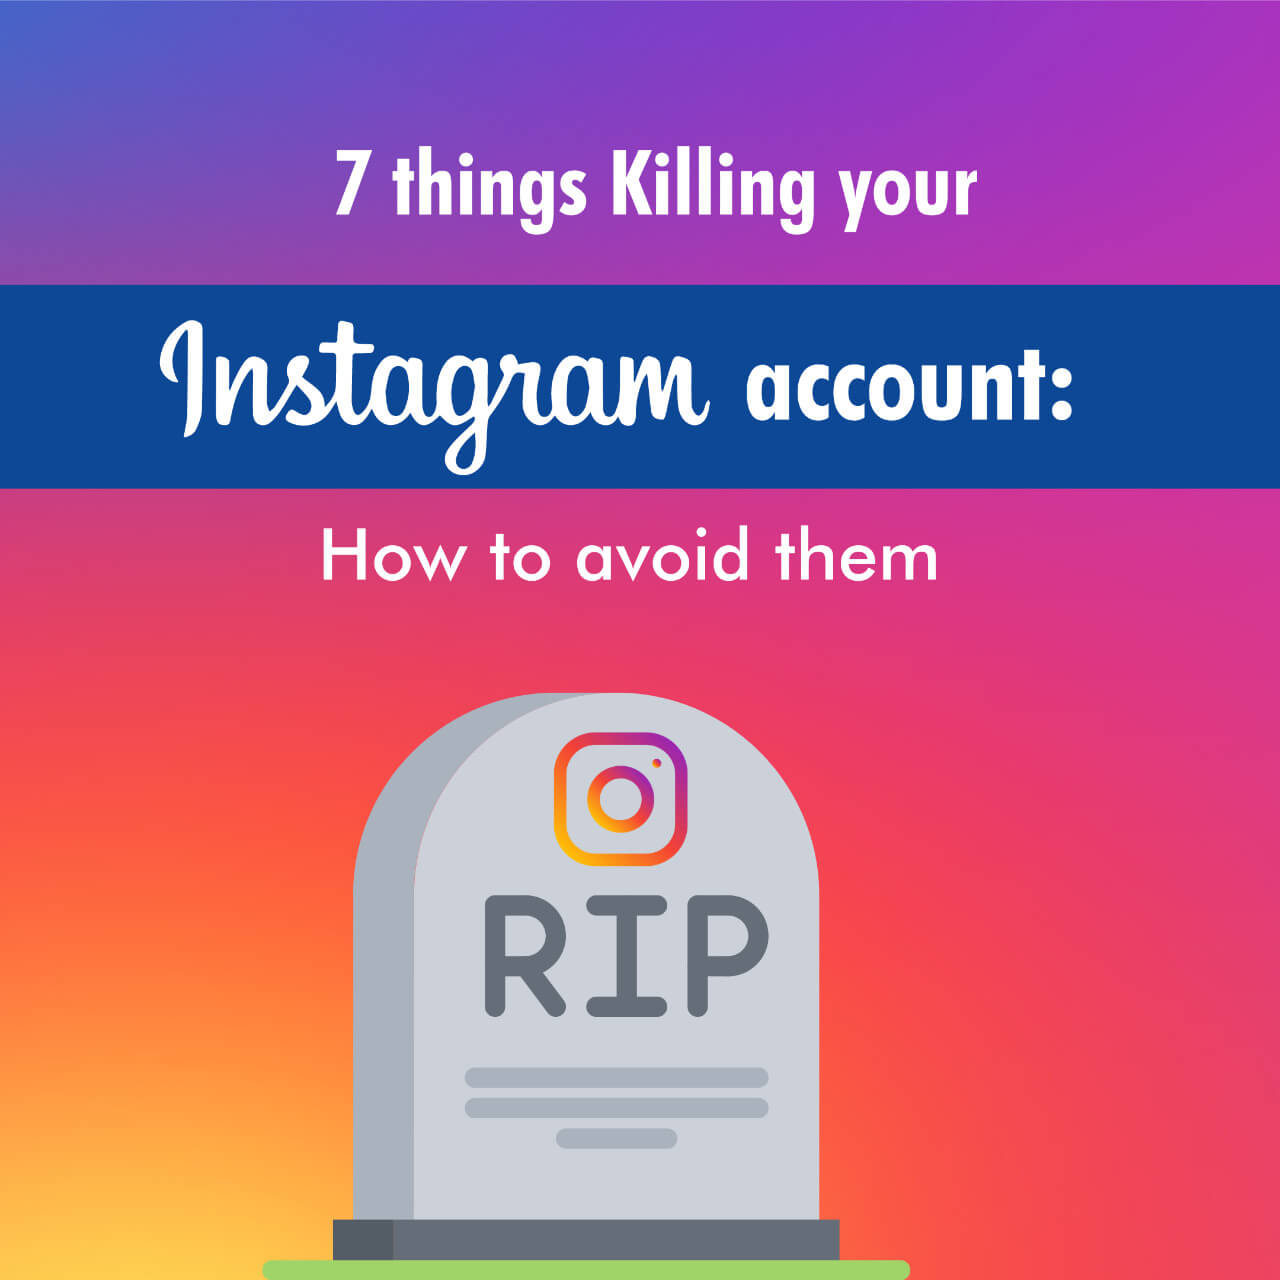 7 things Killing Your Instagram Account: How to Avoid Them